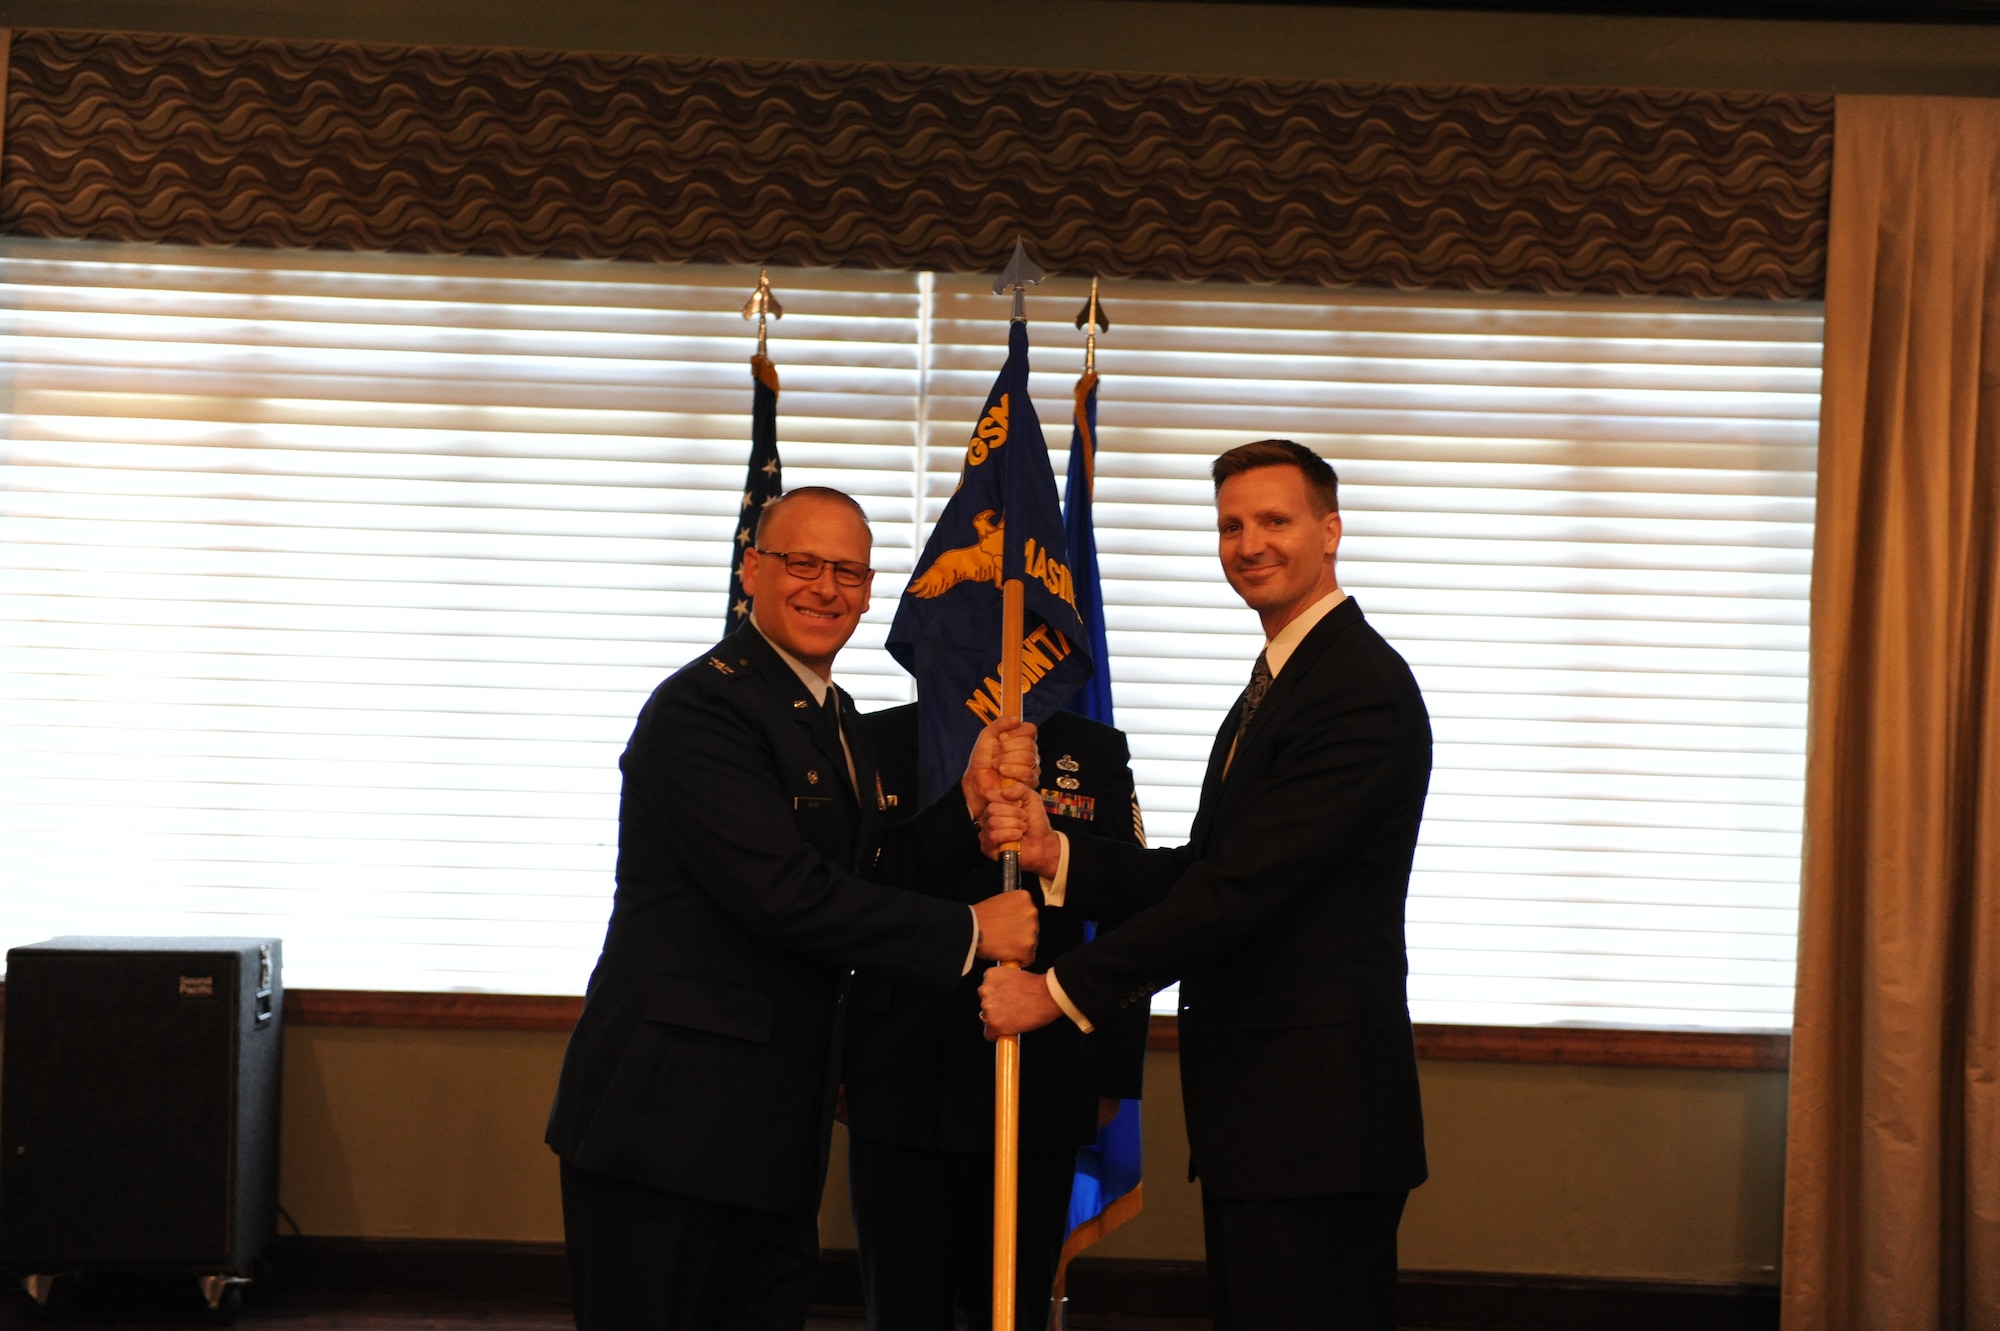 Jason McClurg accepts leadership of the Measurements and Signatures Intelligence Analysis squadron from Col. Steven Watts, Geospatial and Signatures Intelligence Group, at the Wright-Patterson Club, Wright-Patterson Air Force Base, Ohio, June 1, 2022. The MASINT Analysis squadron develops, operationalizes and leverages global sensors to collect, process, exploit and disseminate operationally relevant and responsive measurement and signature intelligence. (U.S. Air Force photo by Staff Sergeant Caleb House)